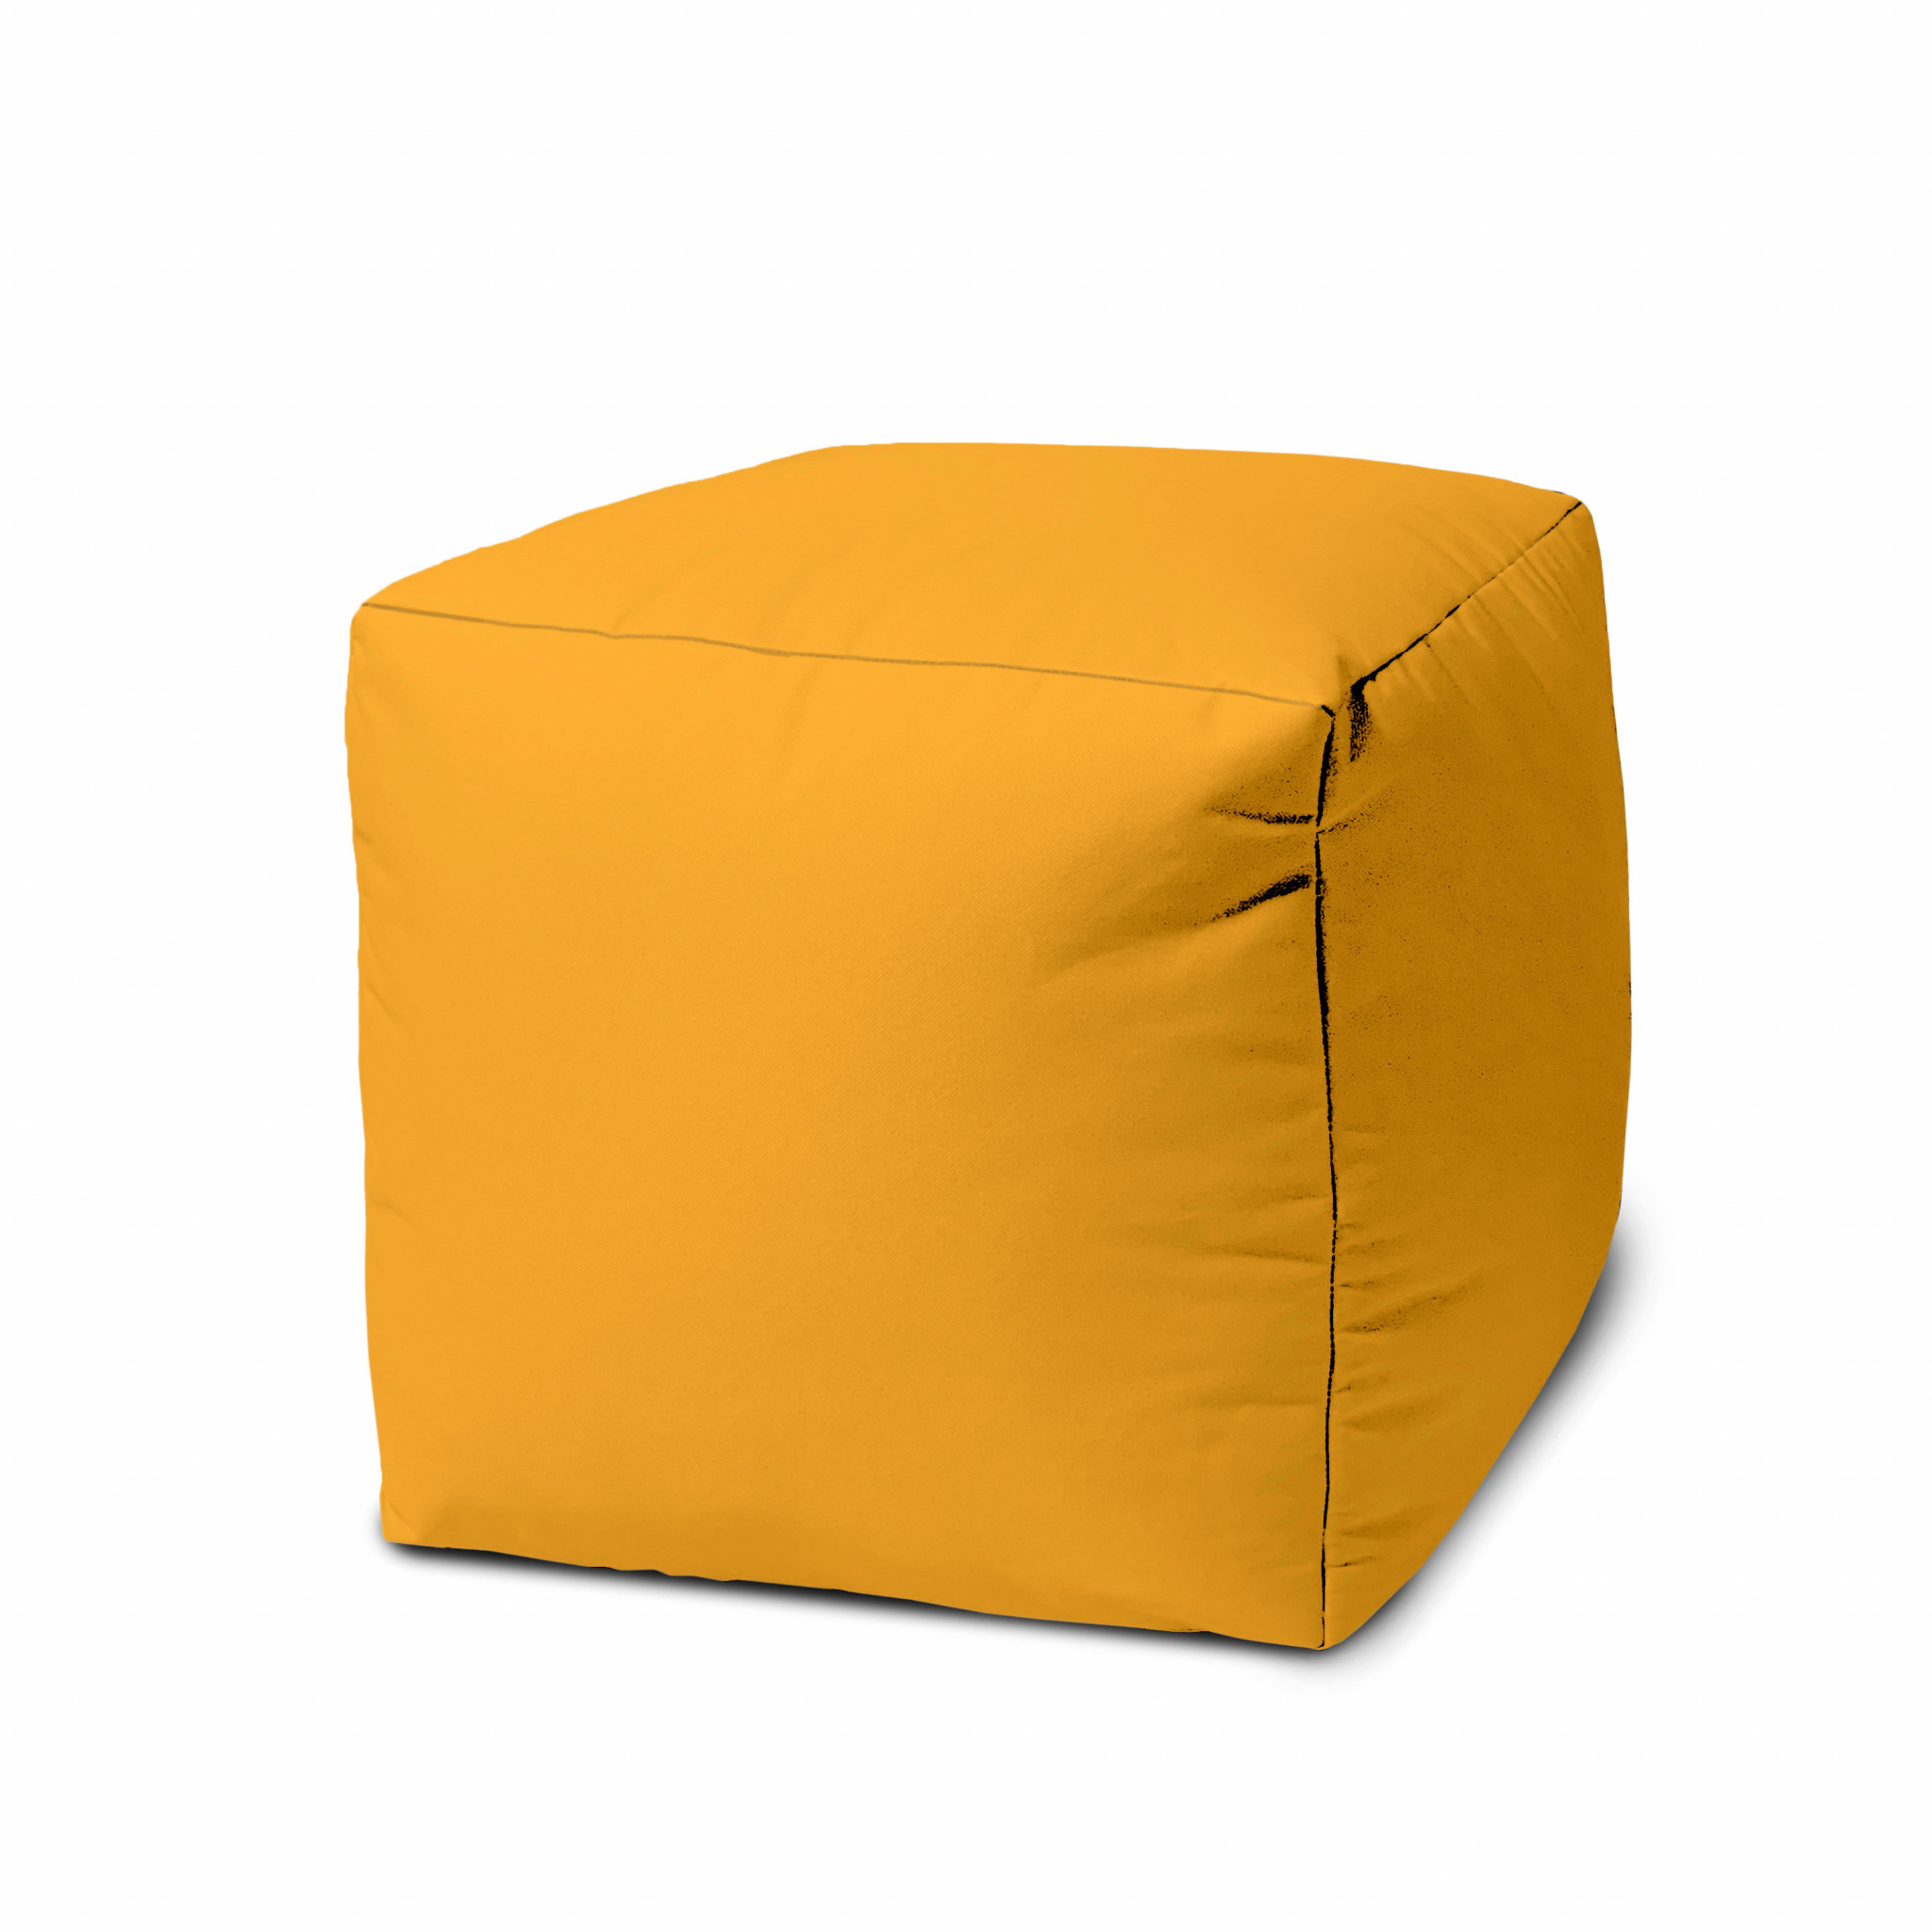 17 Cool Golden Yellow Solid Color Indoor Outdoor Pouf Ottoman